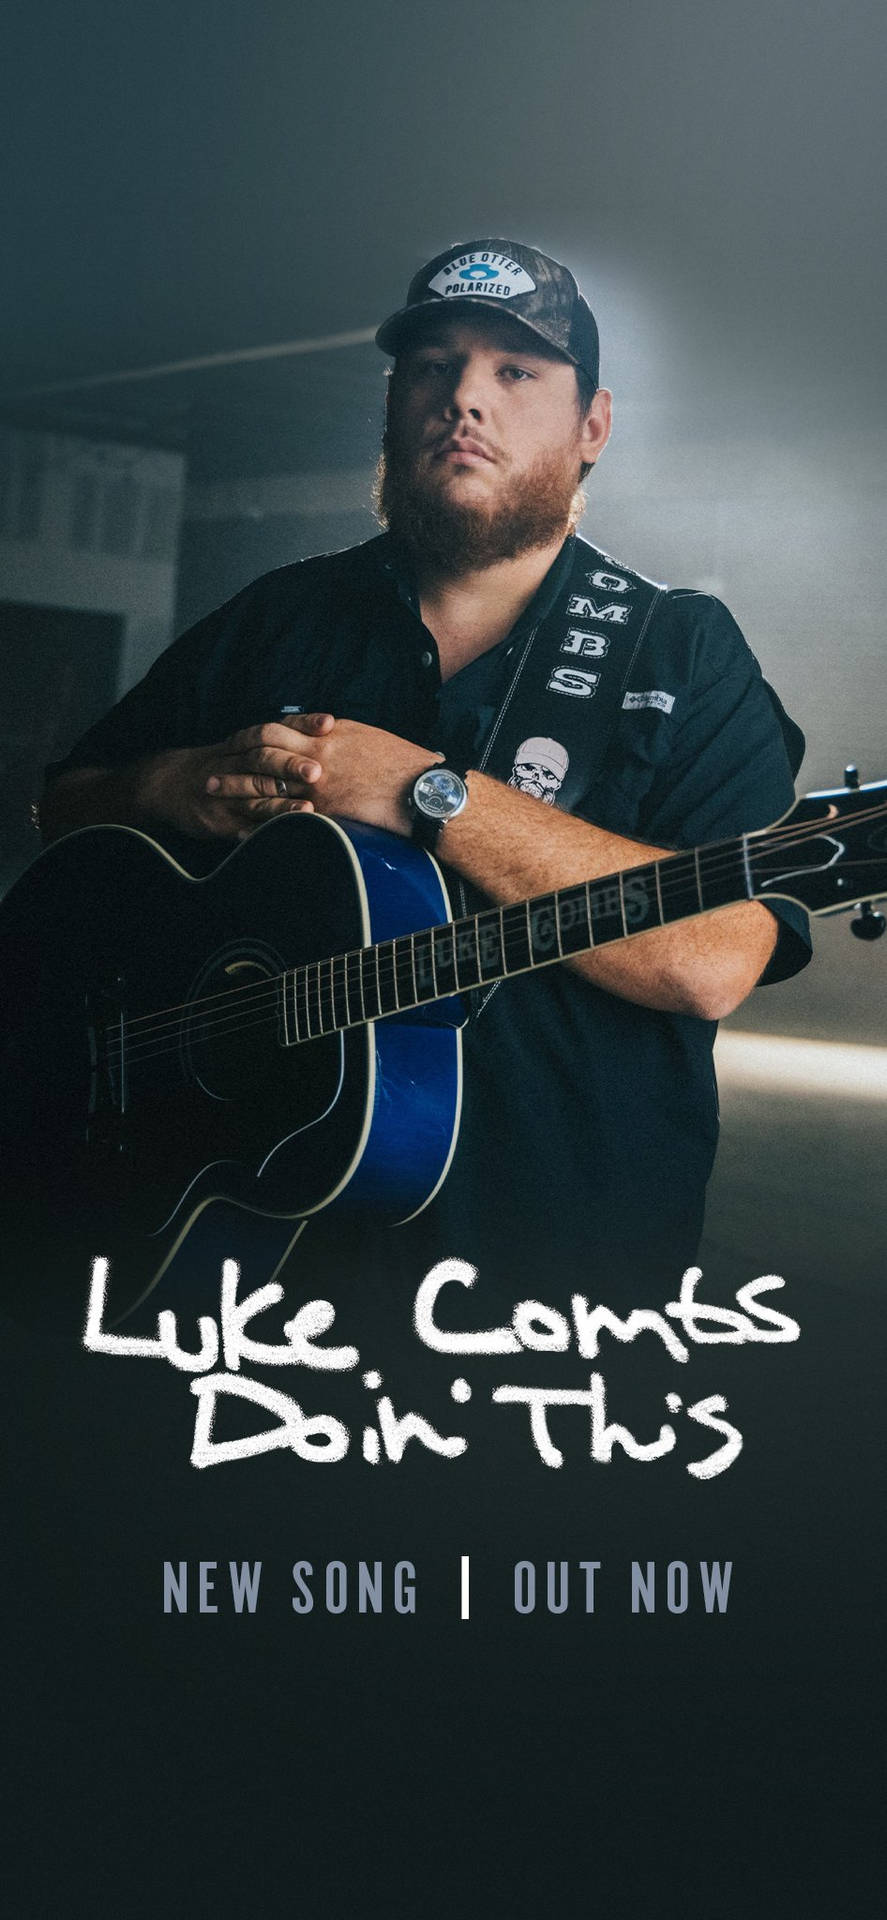 Luke Contess's New Song Out Now Wallpaper